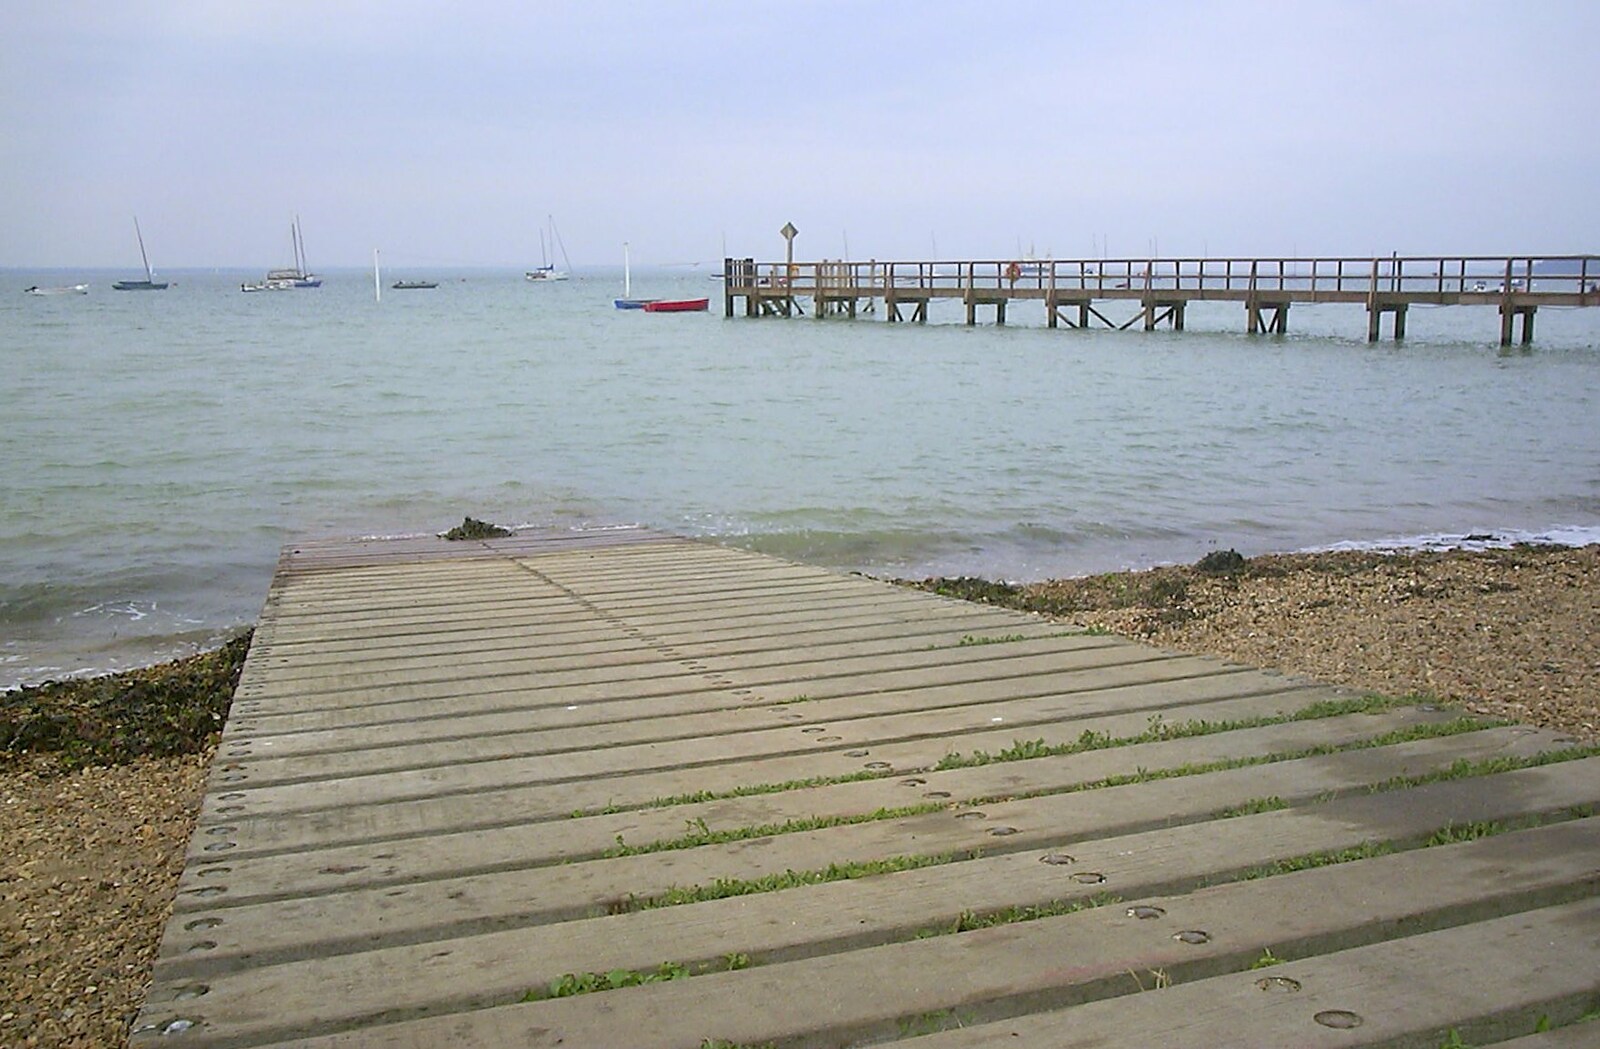 The slipway outside Yarmouth Yacht Club from Cowes Weekend, Cowes, Isle of Wight - 7th August 2004